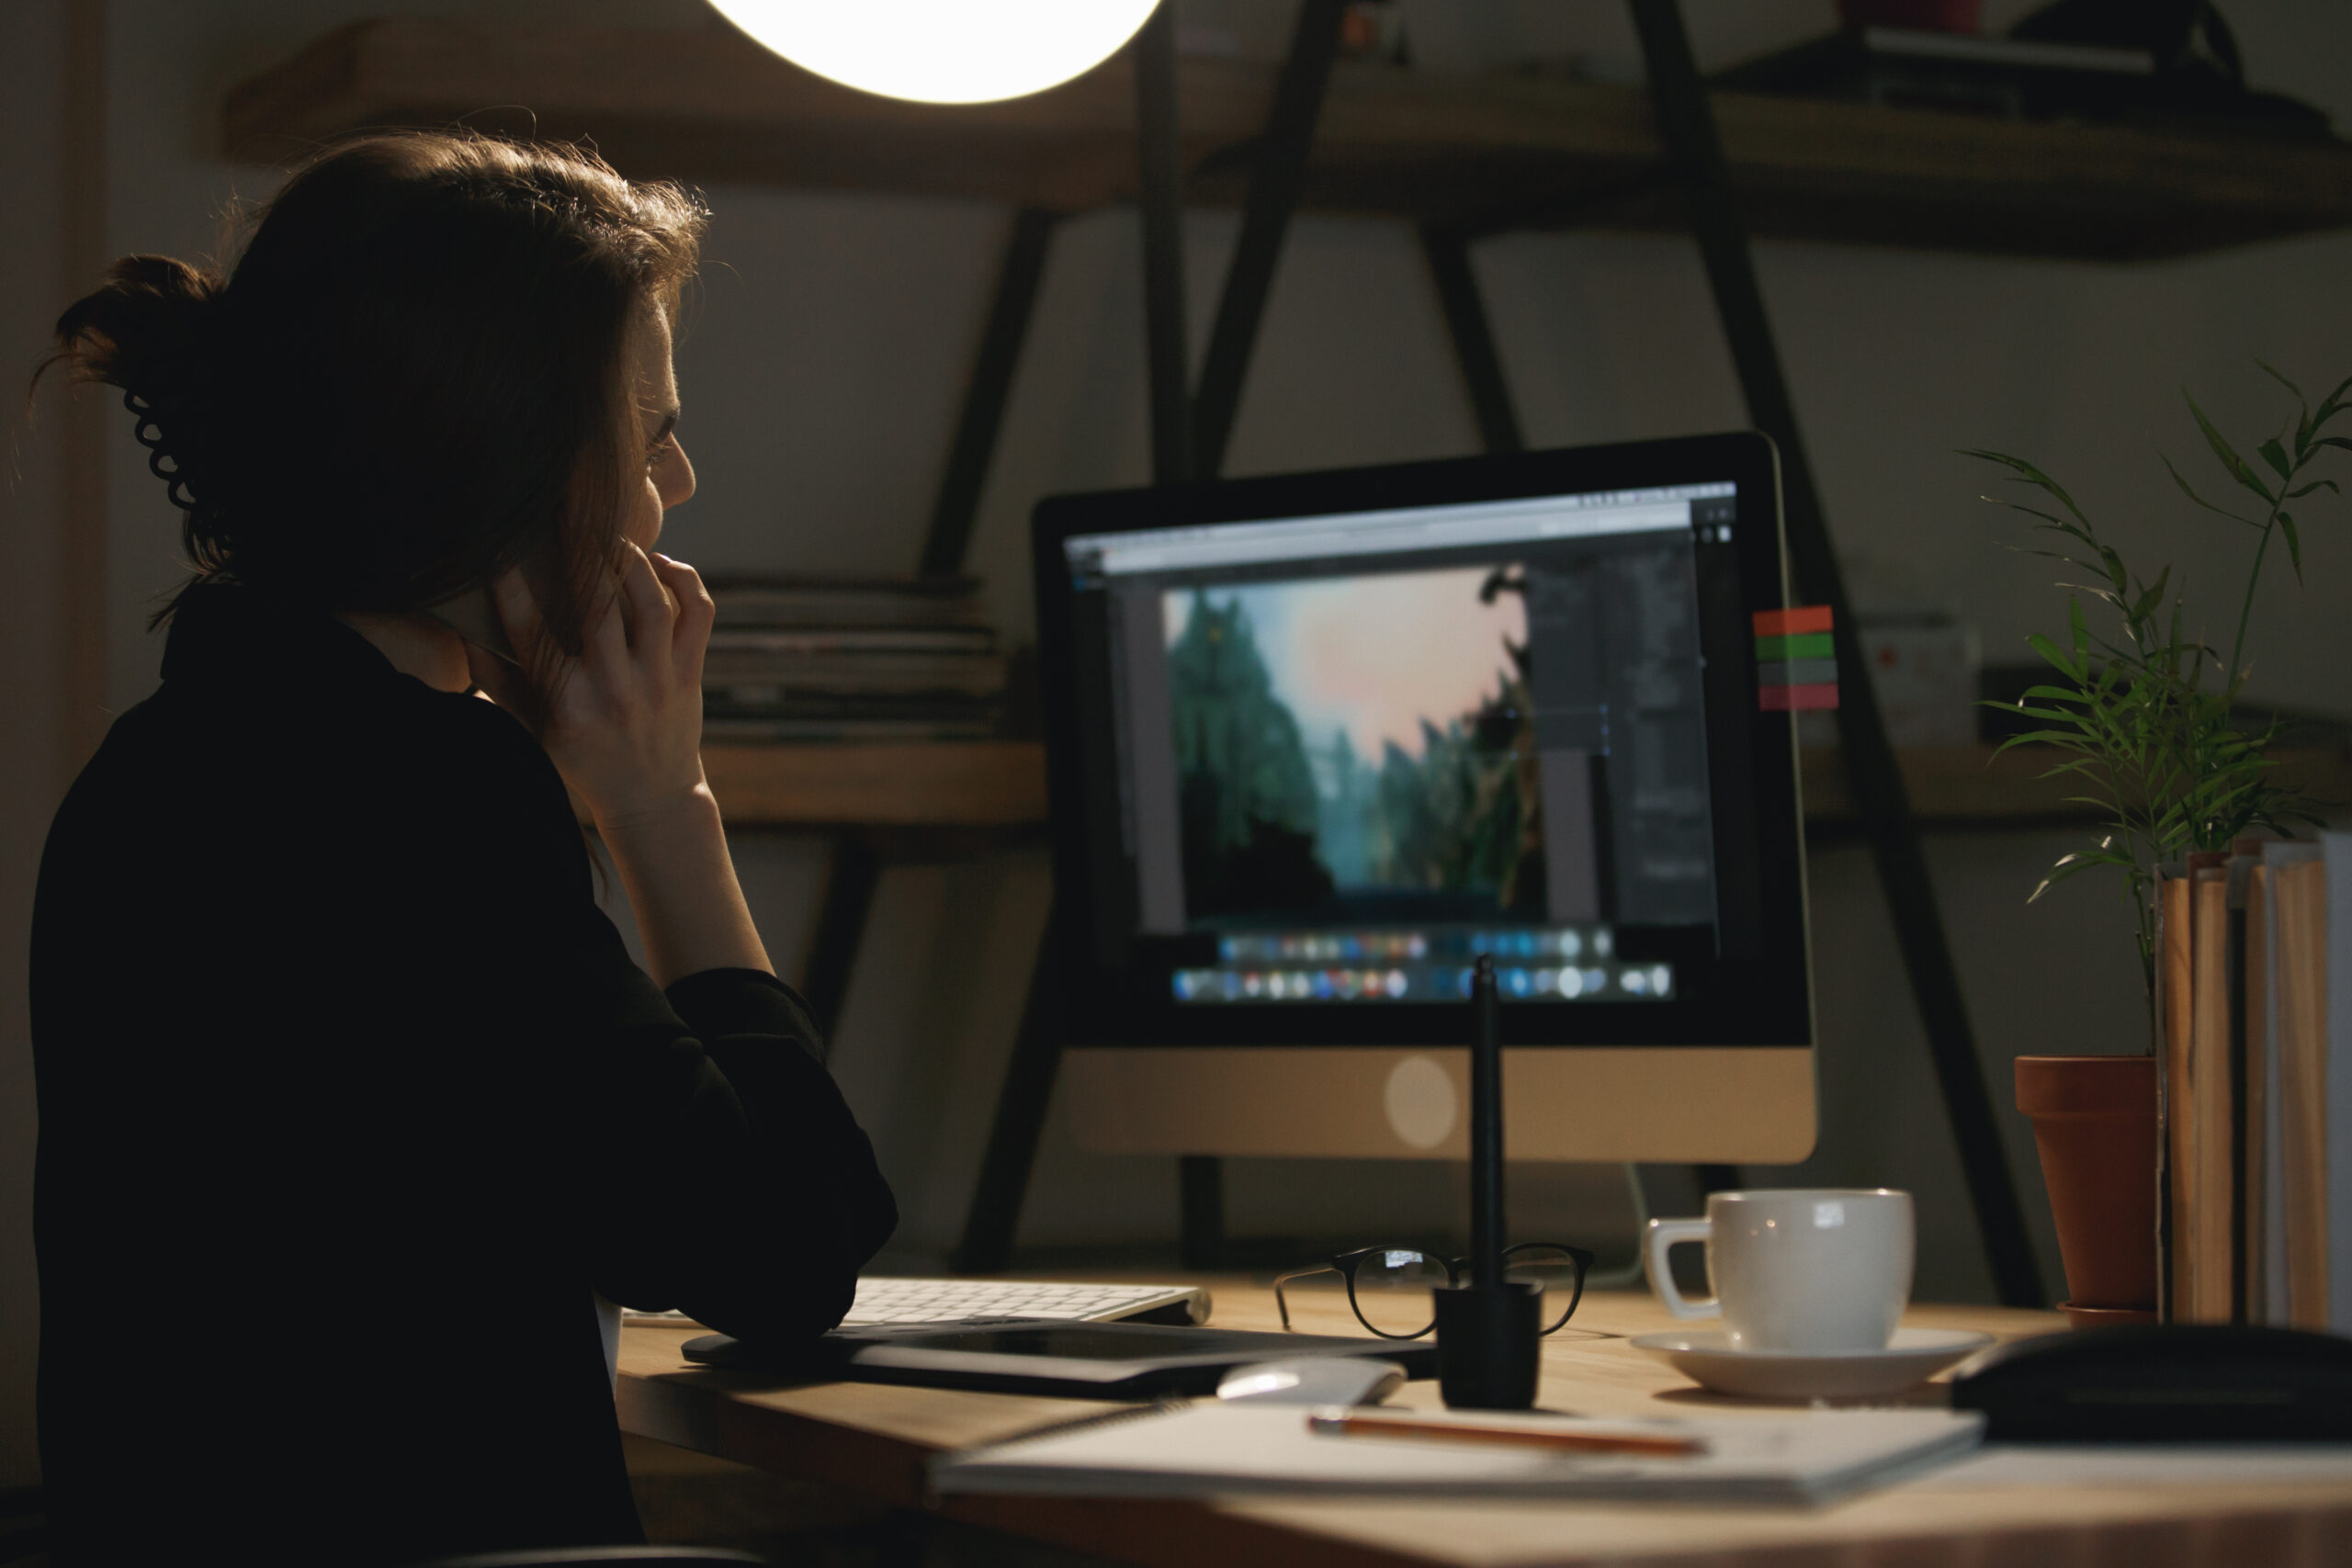 With these 5 top animation courses, you can learn the craft of visual storytelling and unleash your creative potential!